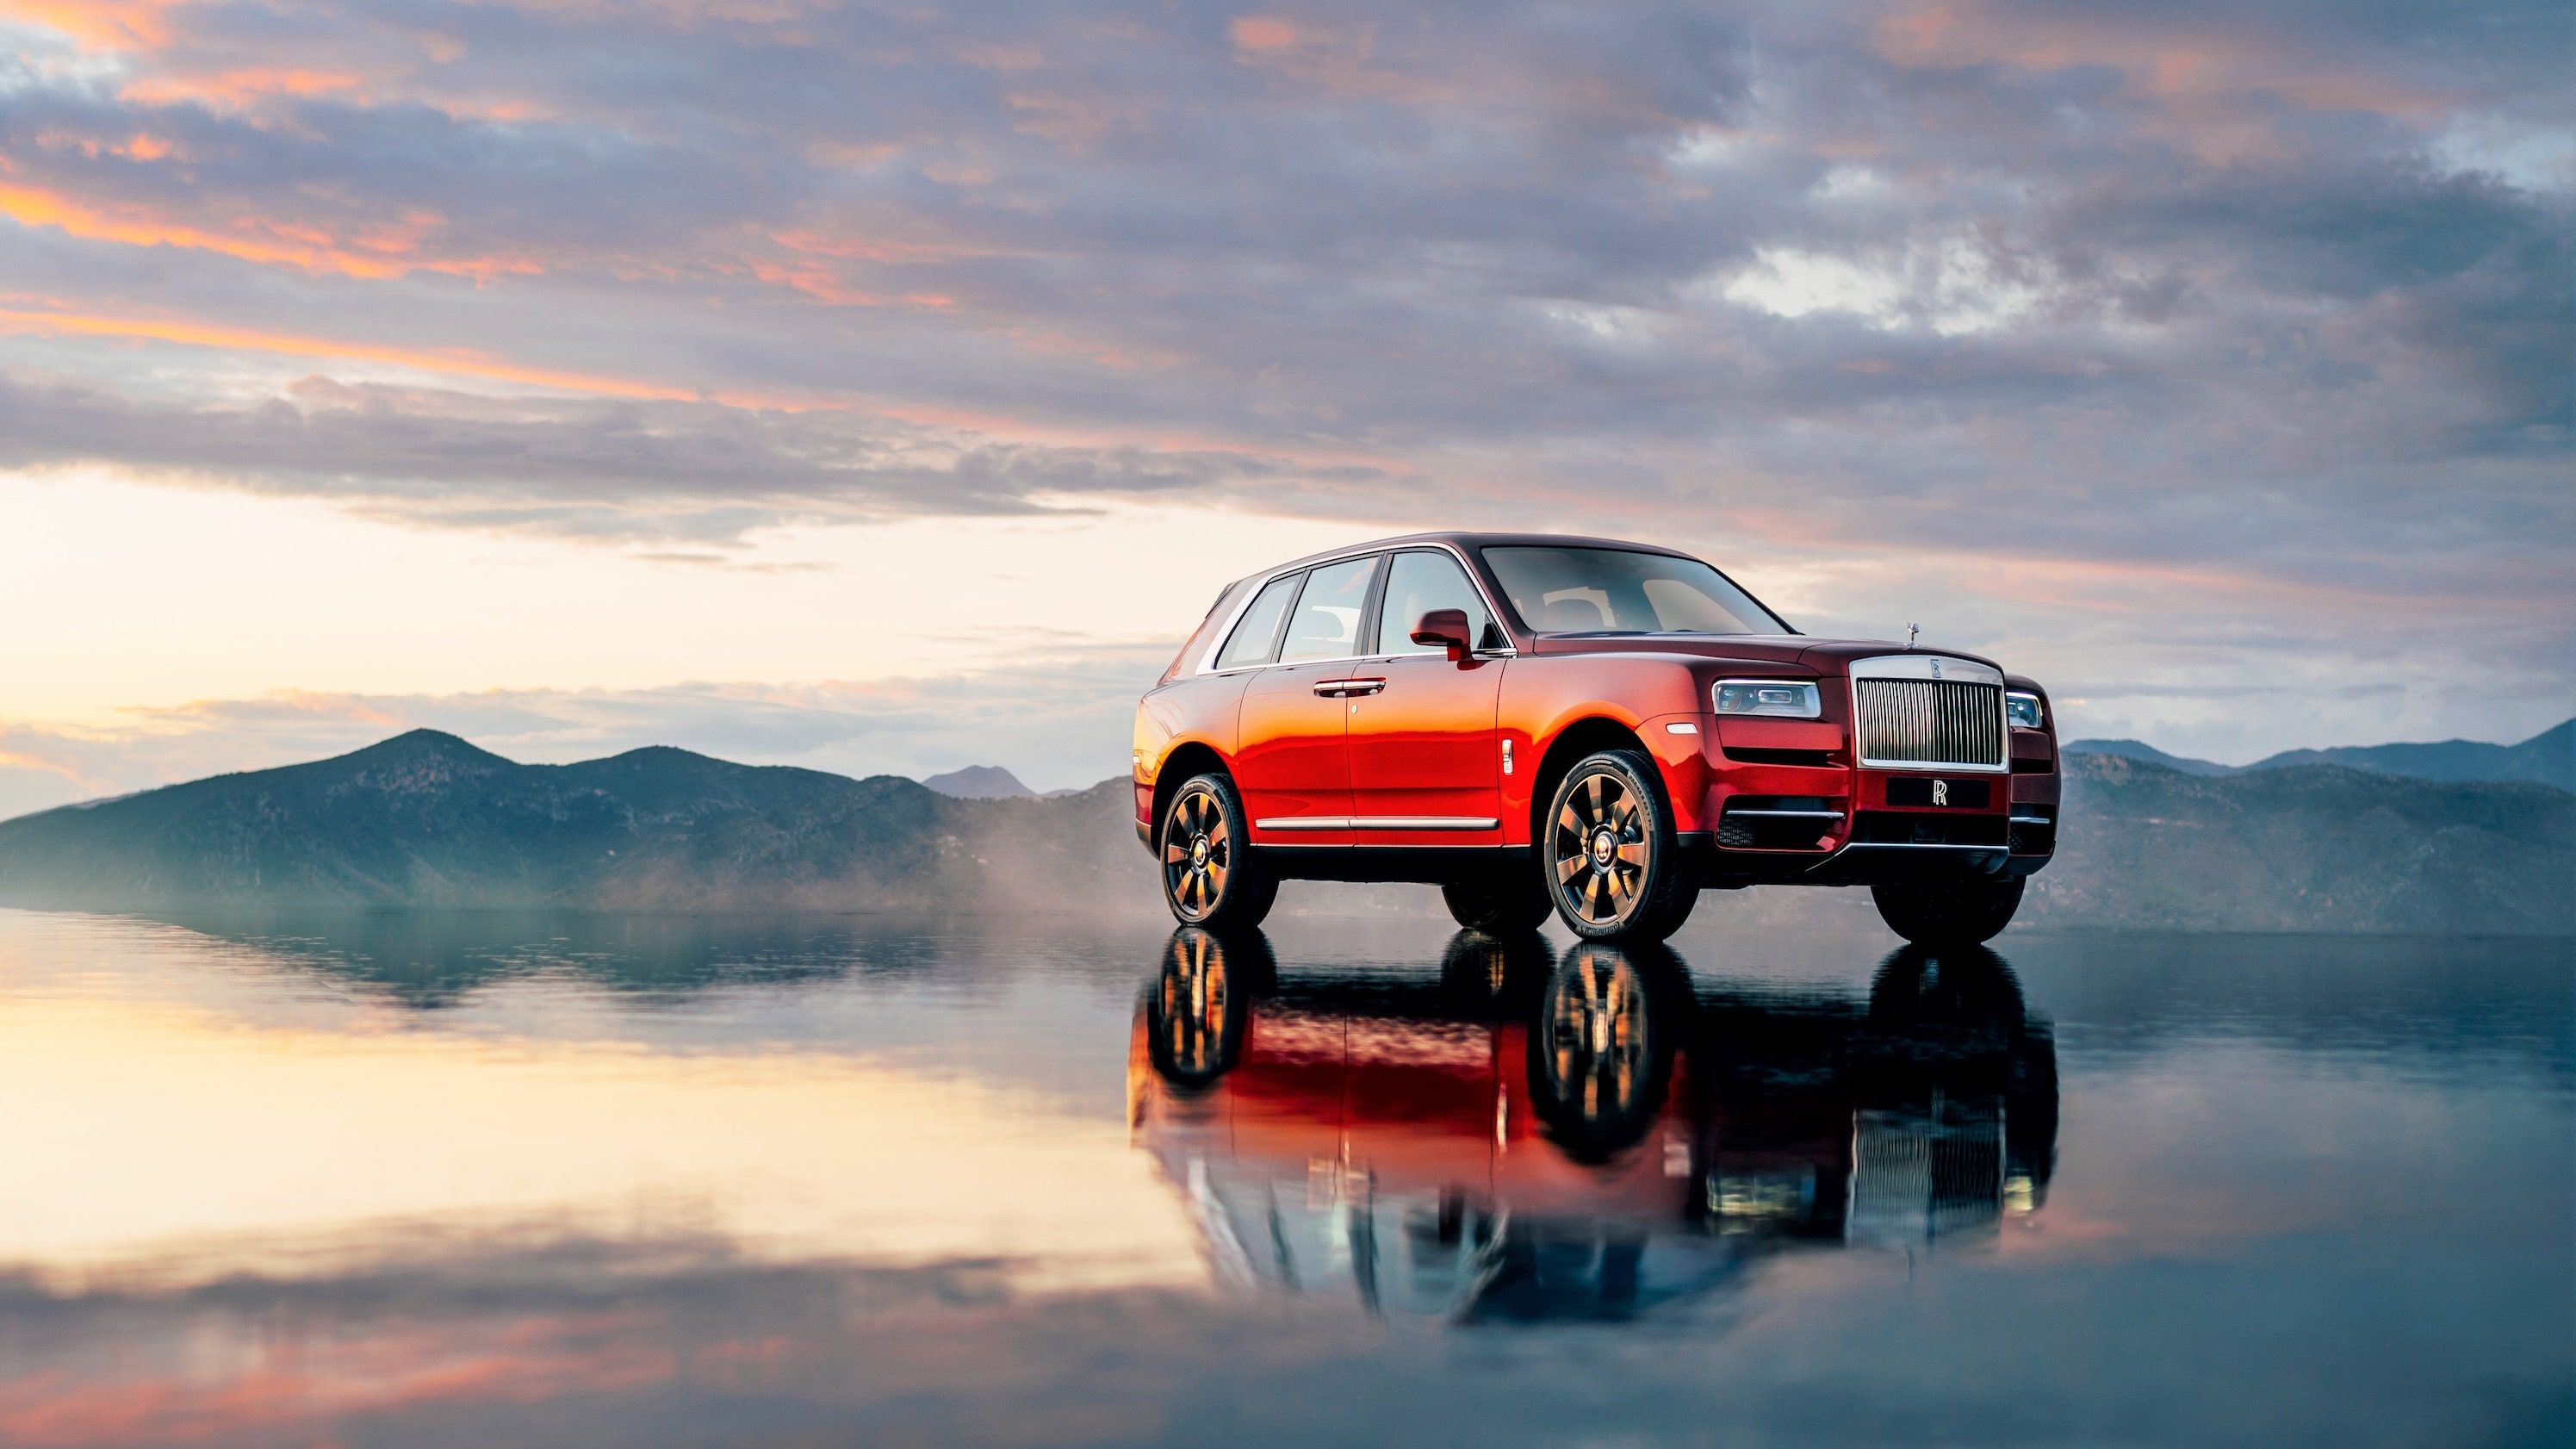 Rolls Royce Unveils The World's Most Expensive SUV